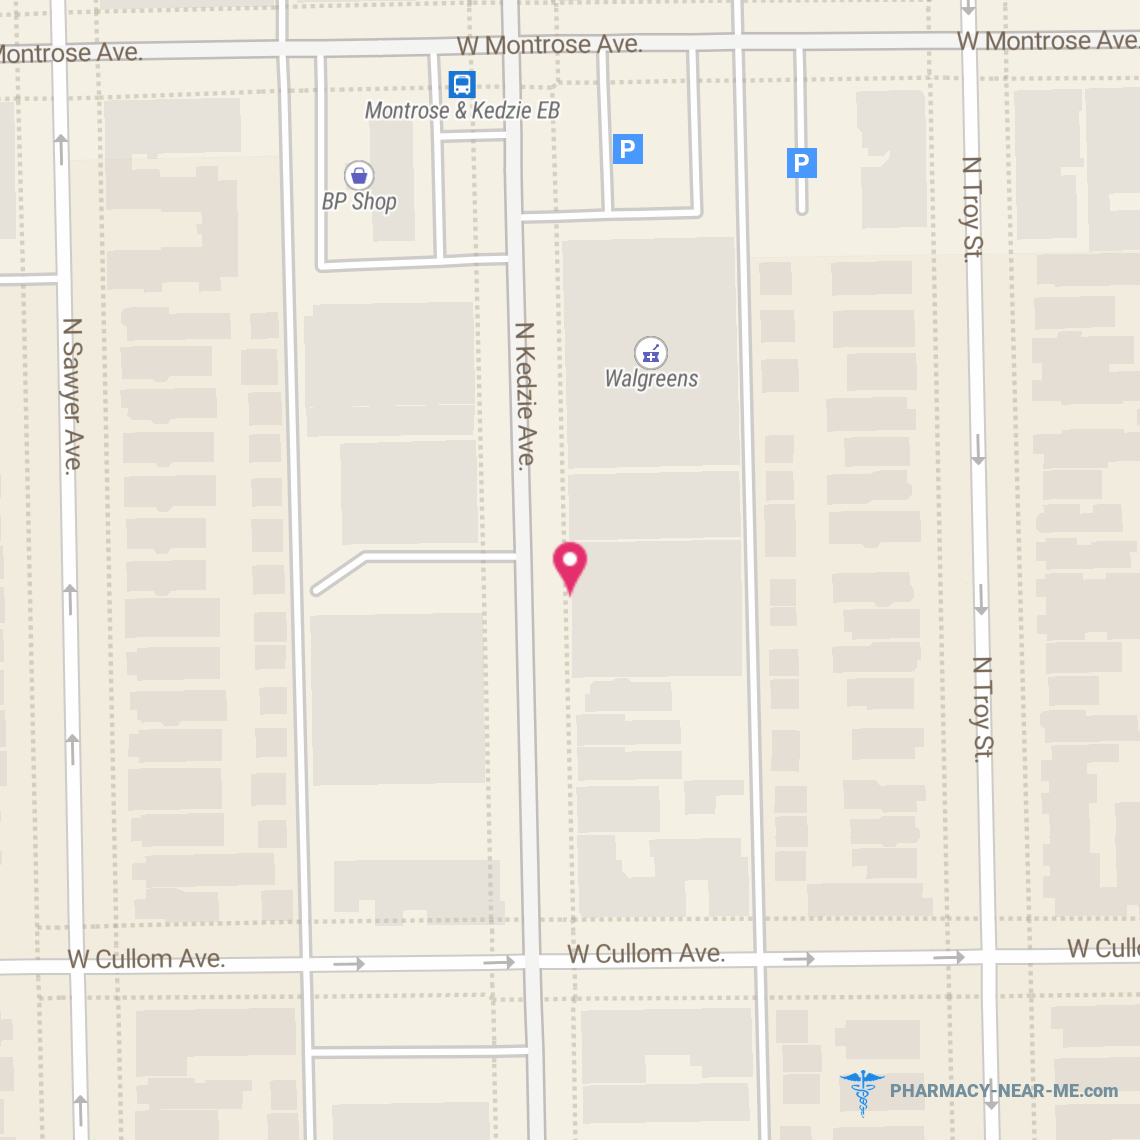 Walgreens #03950 - Pharmacy Open Hours, Phone, Reviews & Information: 4343 N Kedzie Ave, Chicago, IL 60618